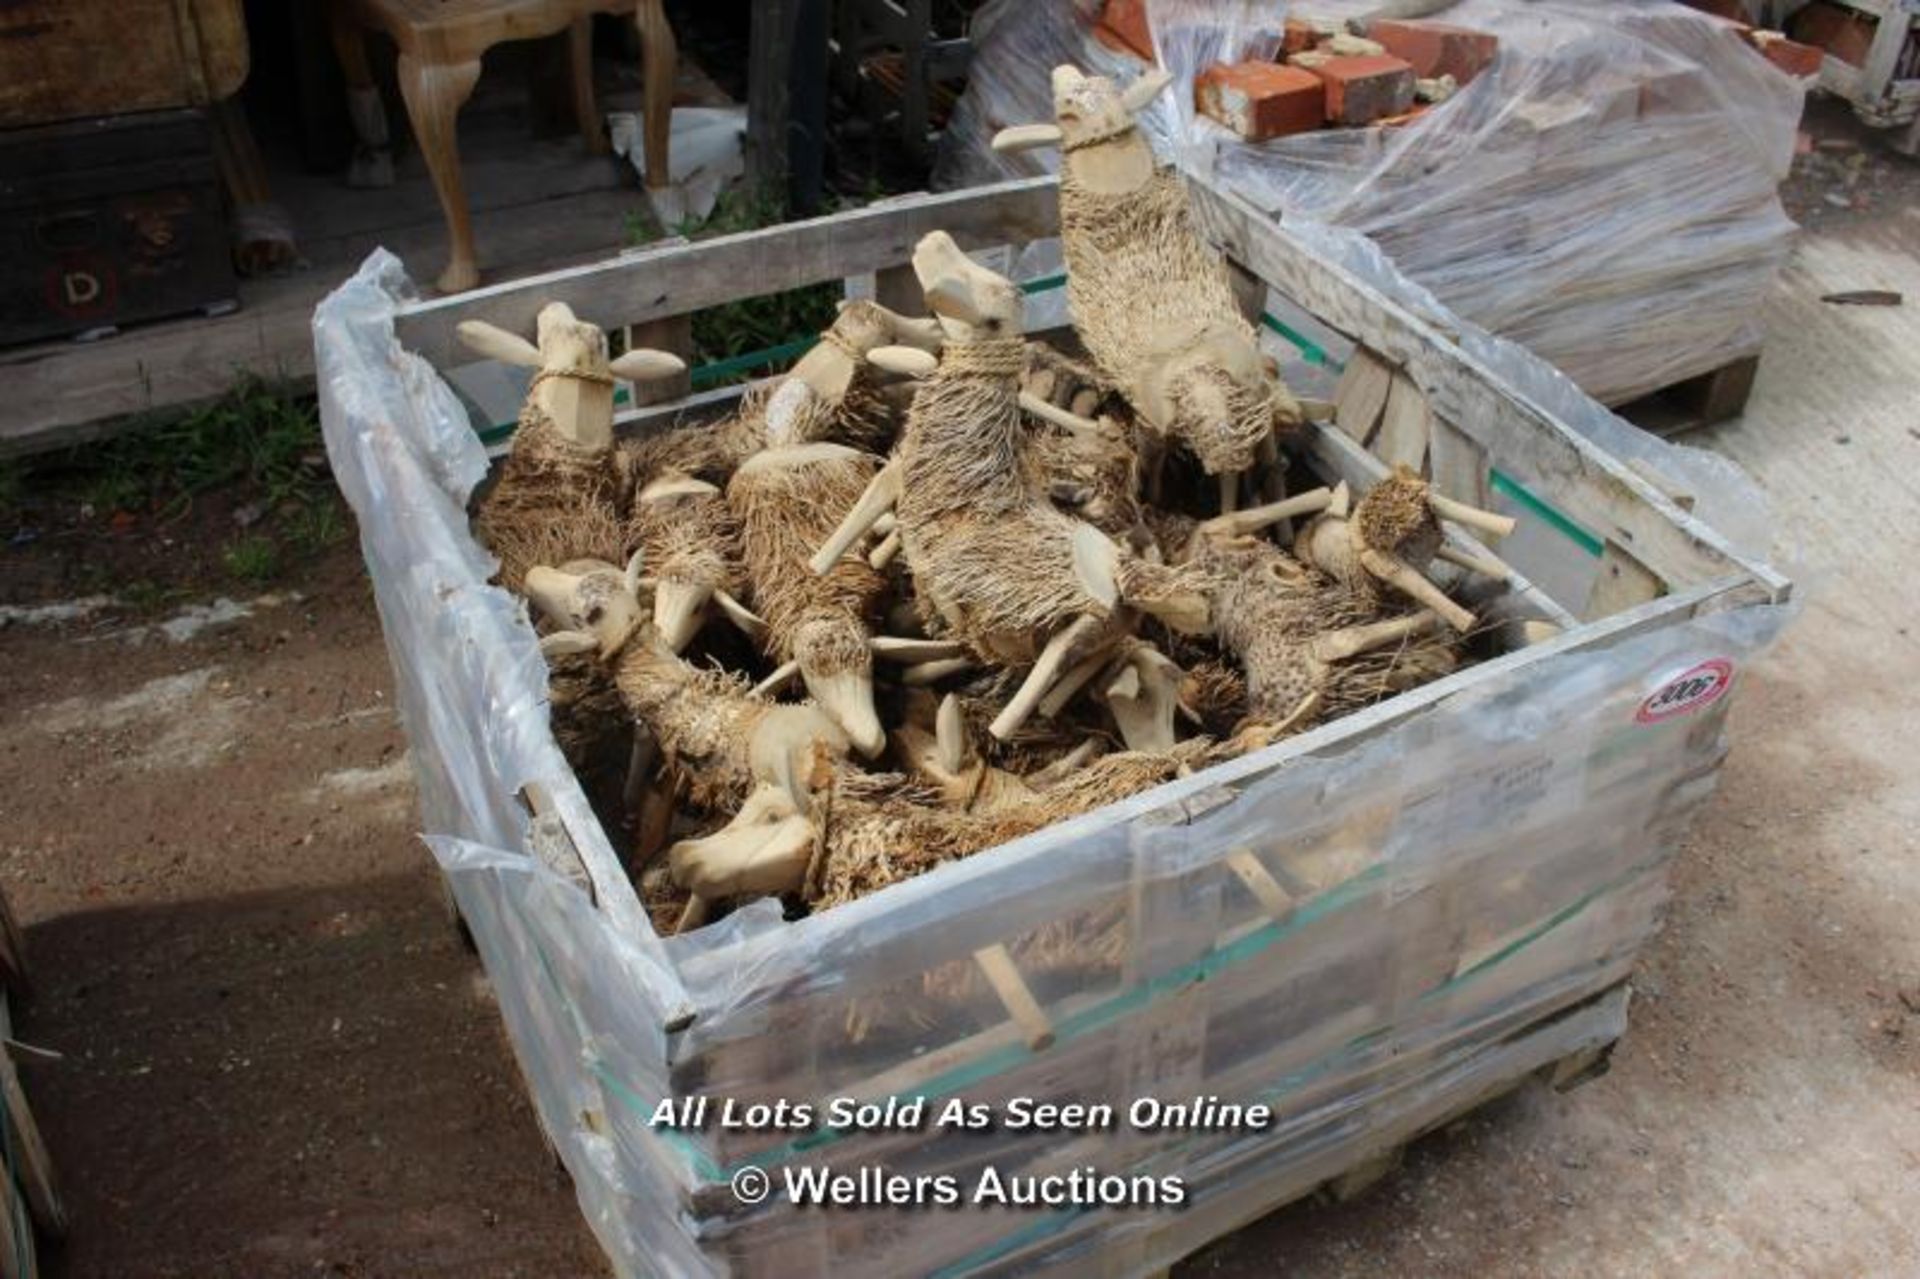 *PALLET OF APPROX 50 CARVED WOODEN SHEEP